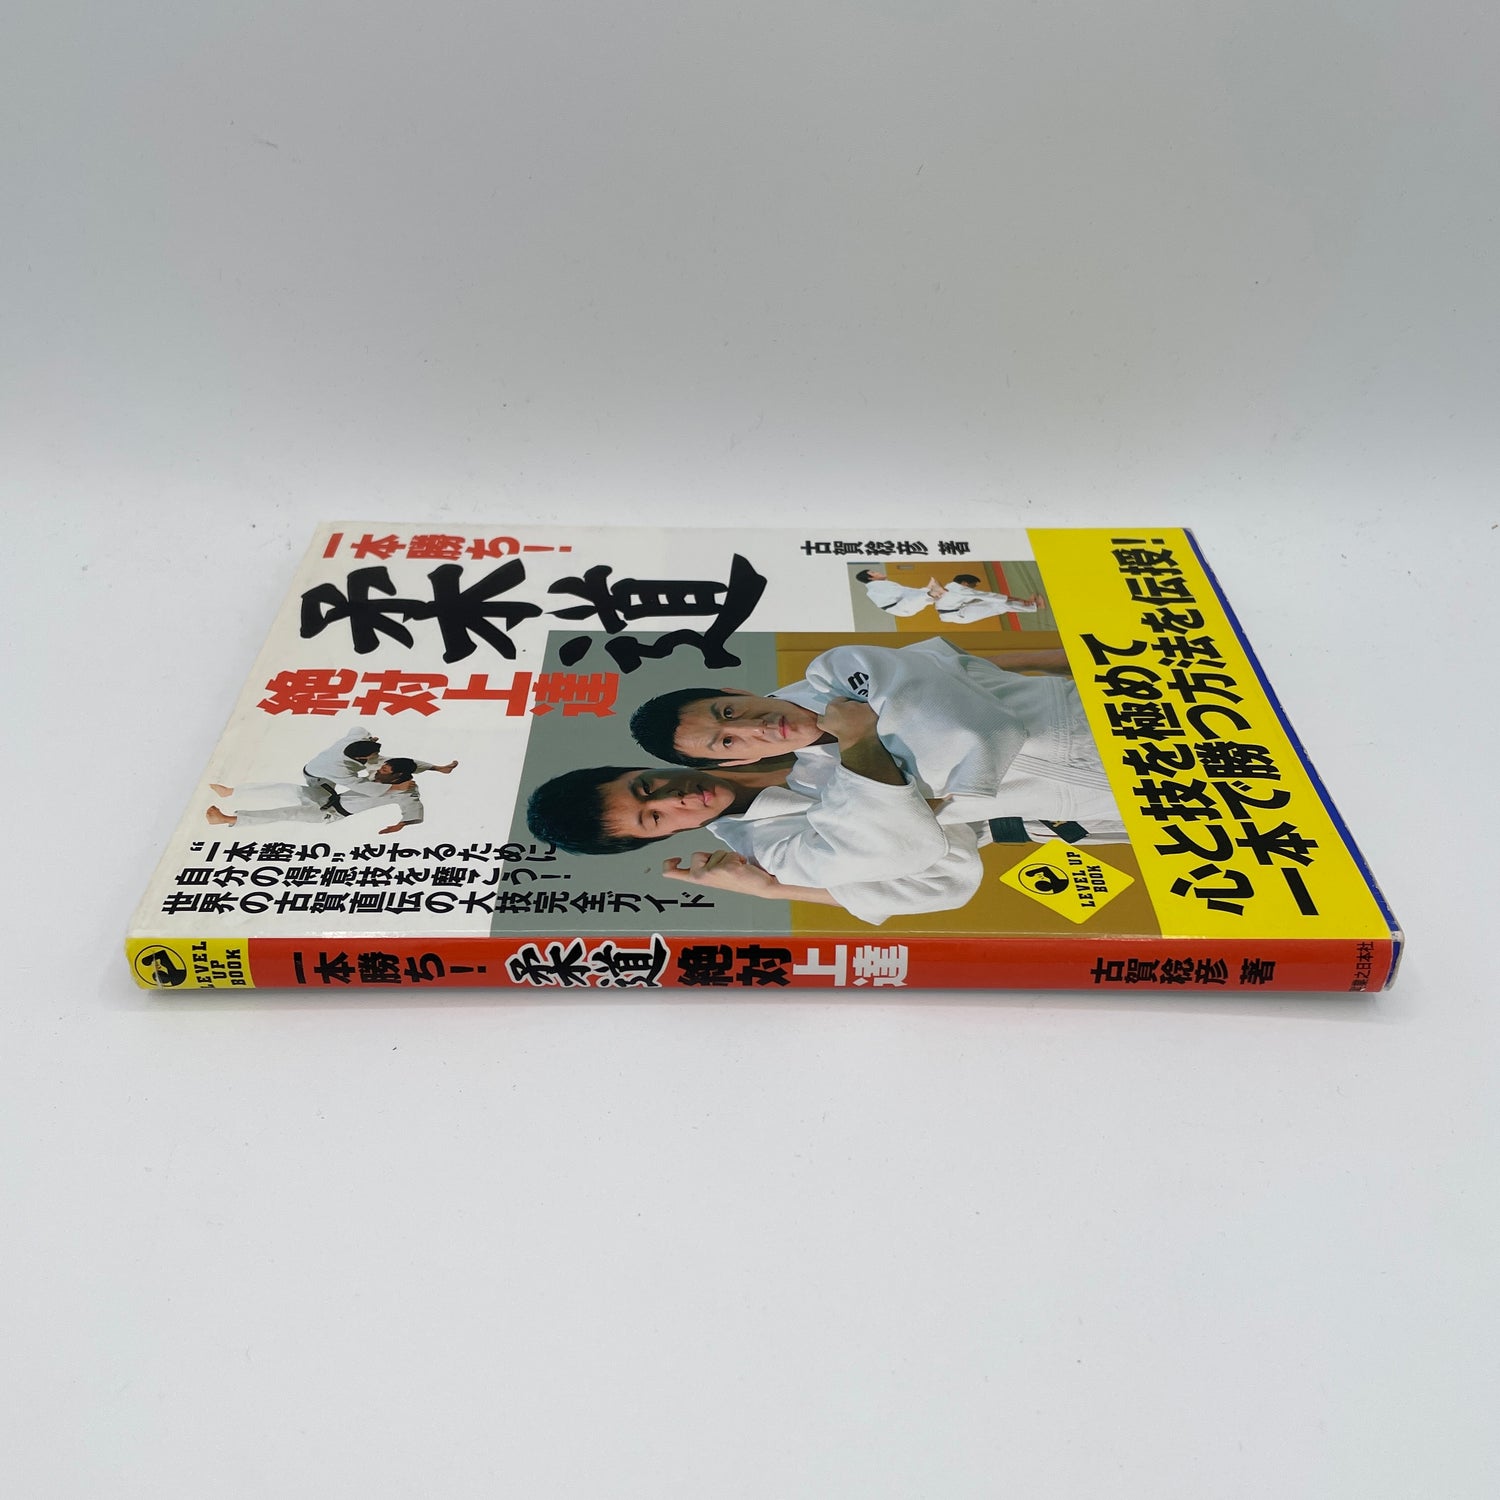 Absolute Judo Improvement Book By Toshihiko Koga (Preowned)